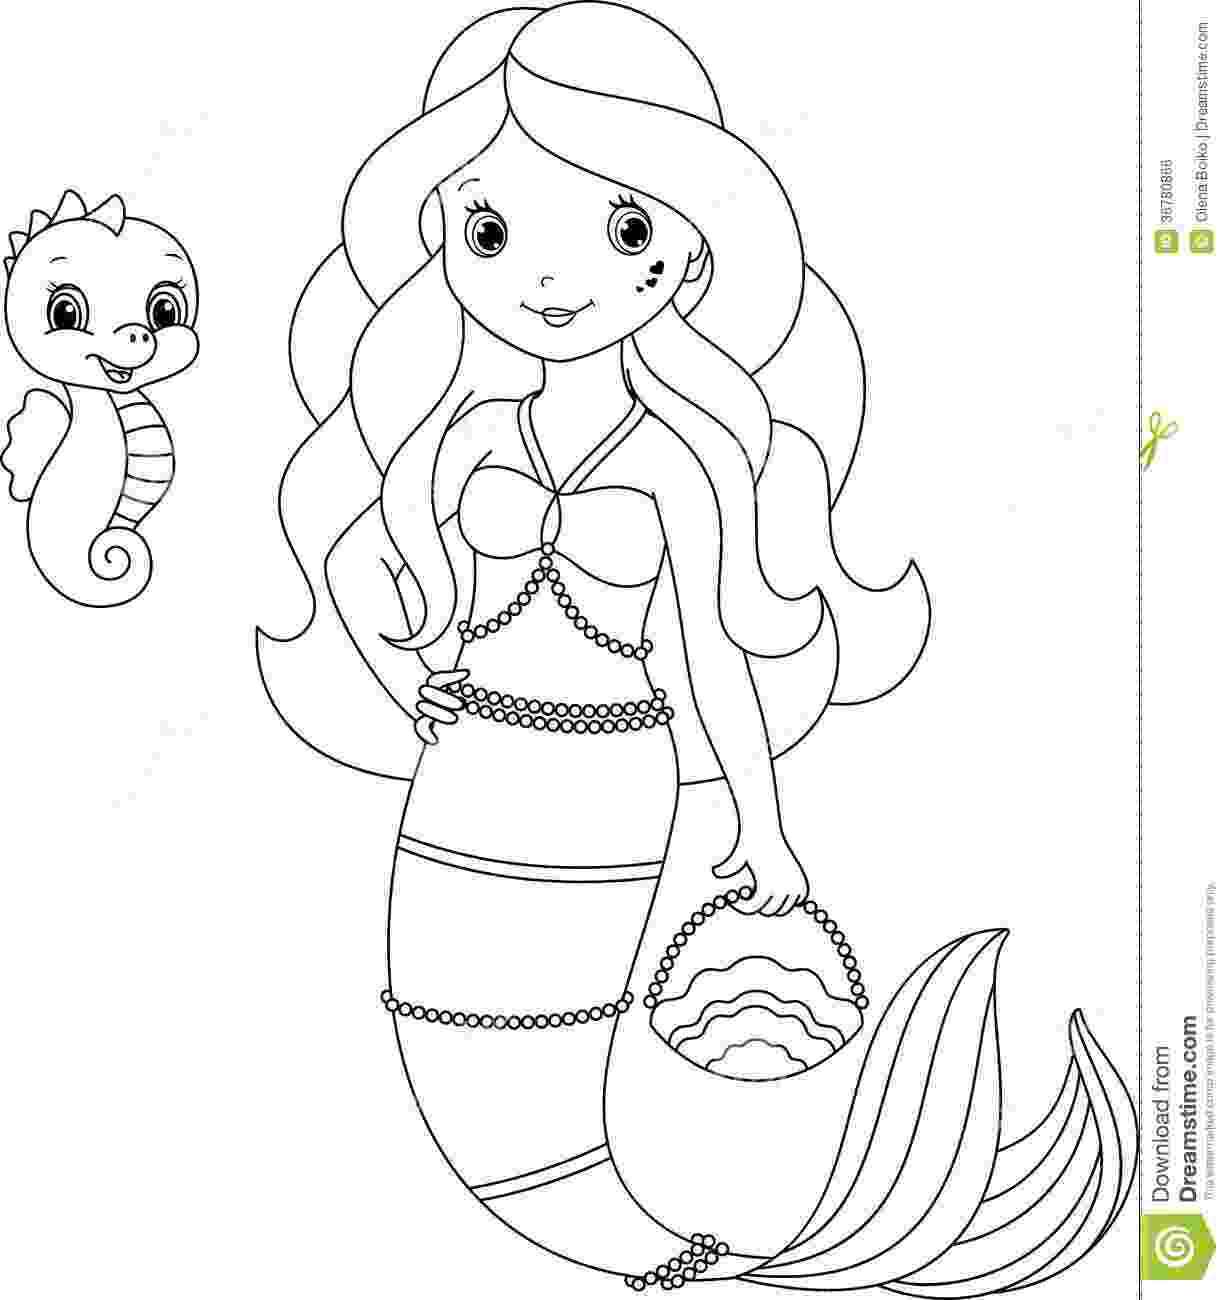 printable little mermaid colouring pages cute kawaii resources little mermaid printable 